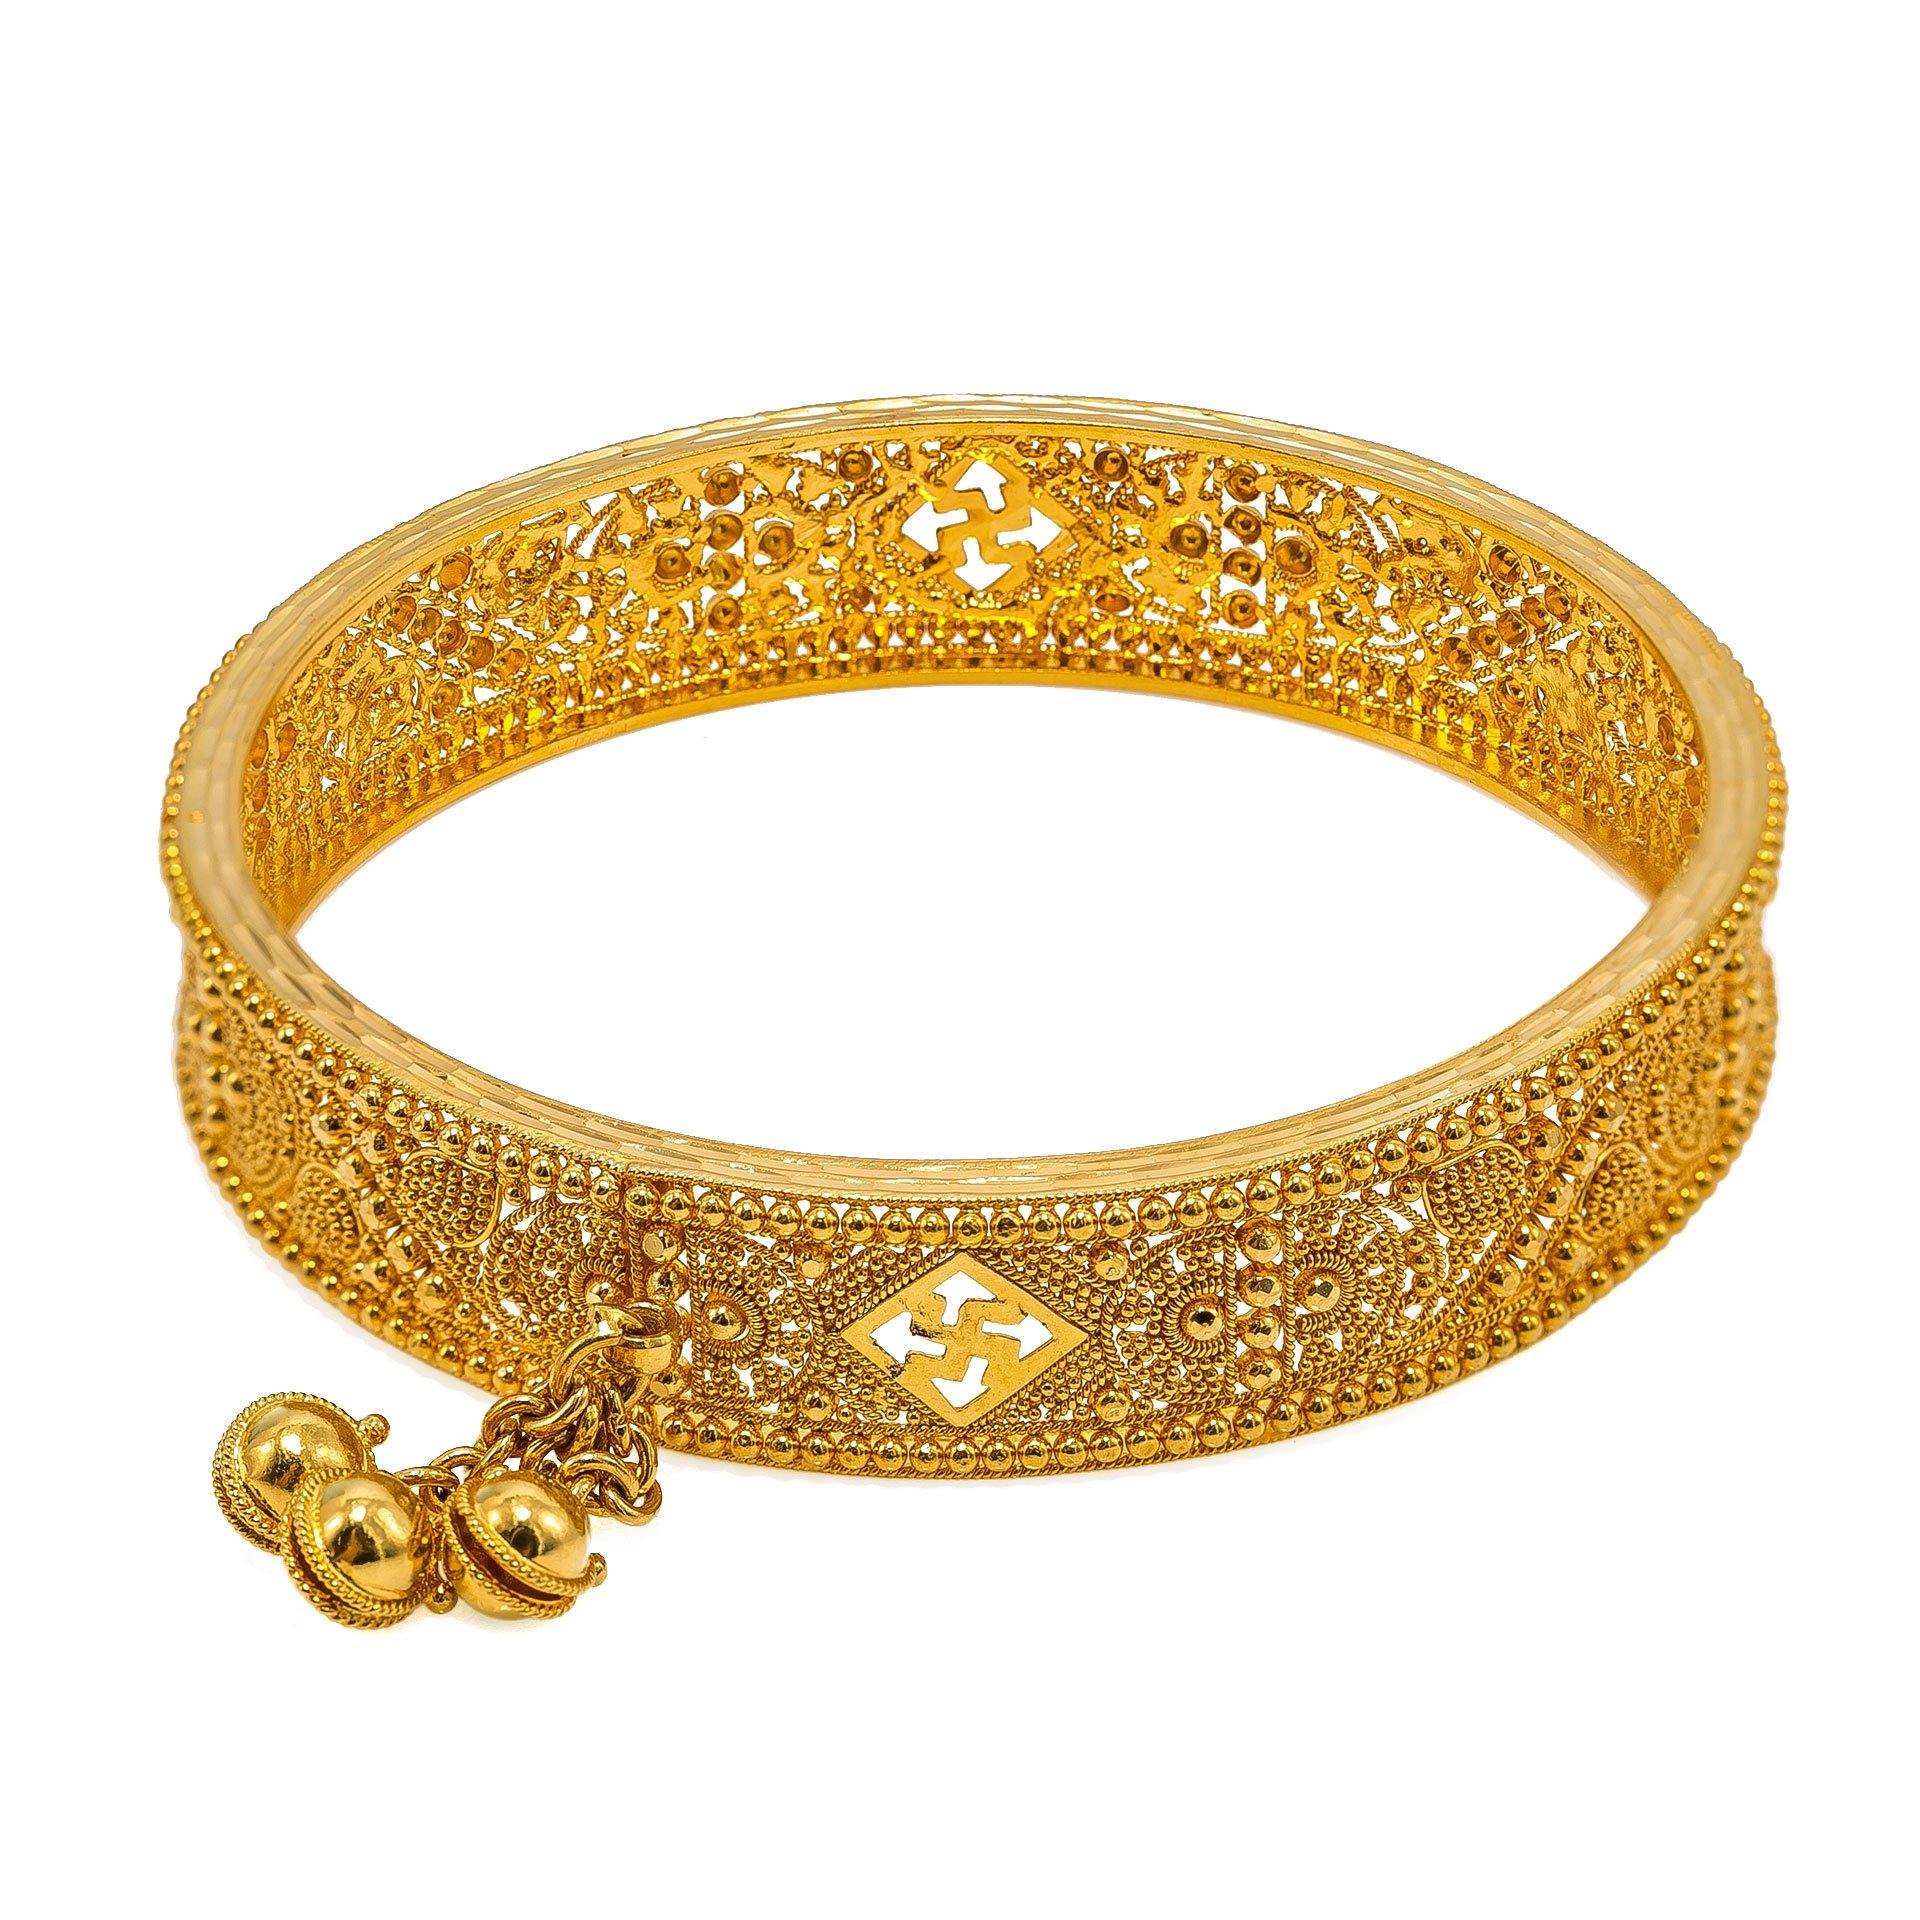 Shop Indian Gold Bangles | 22k Gold Bangles for Women | Gold Palace